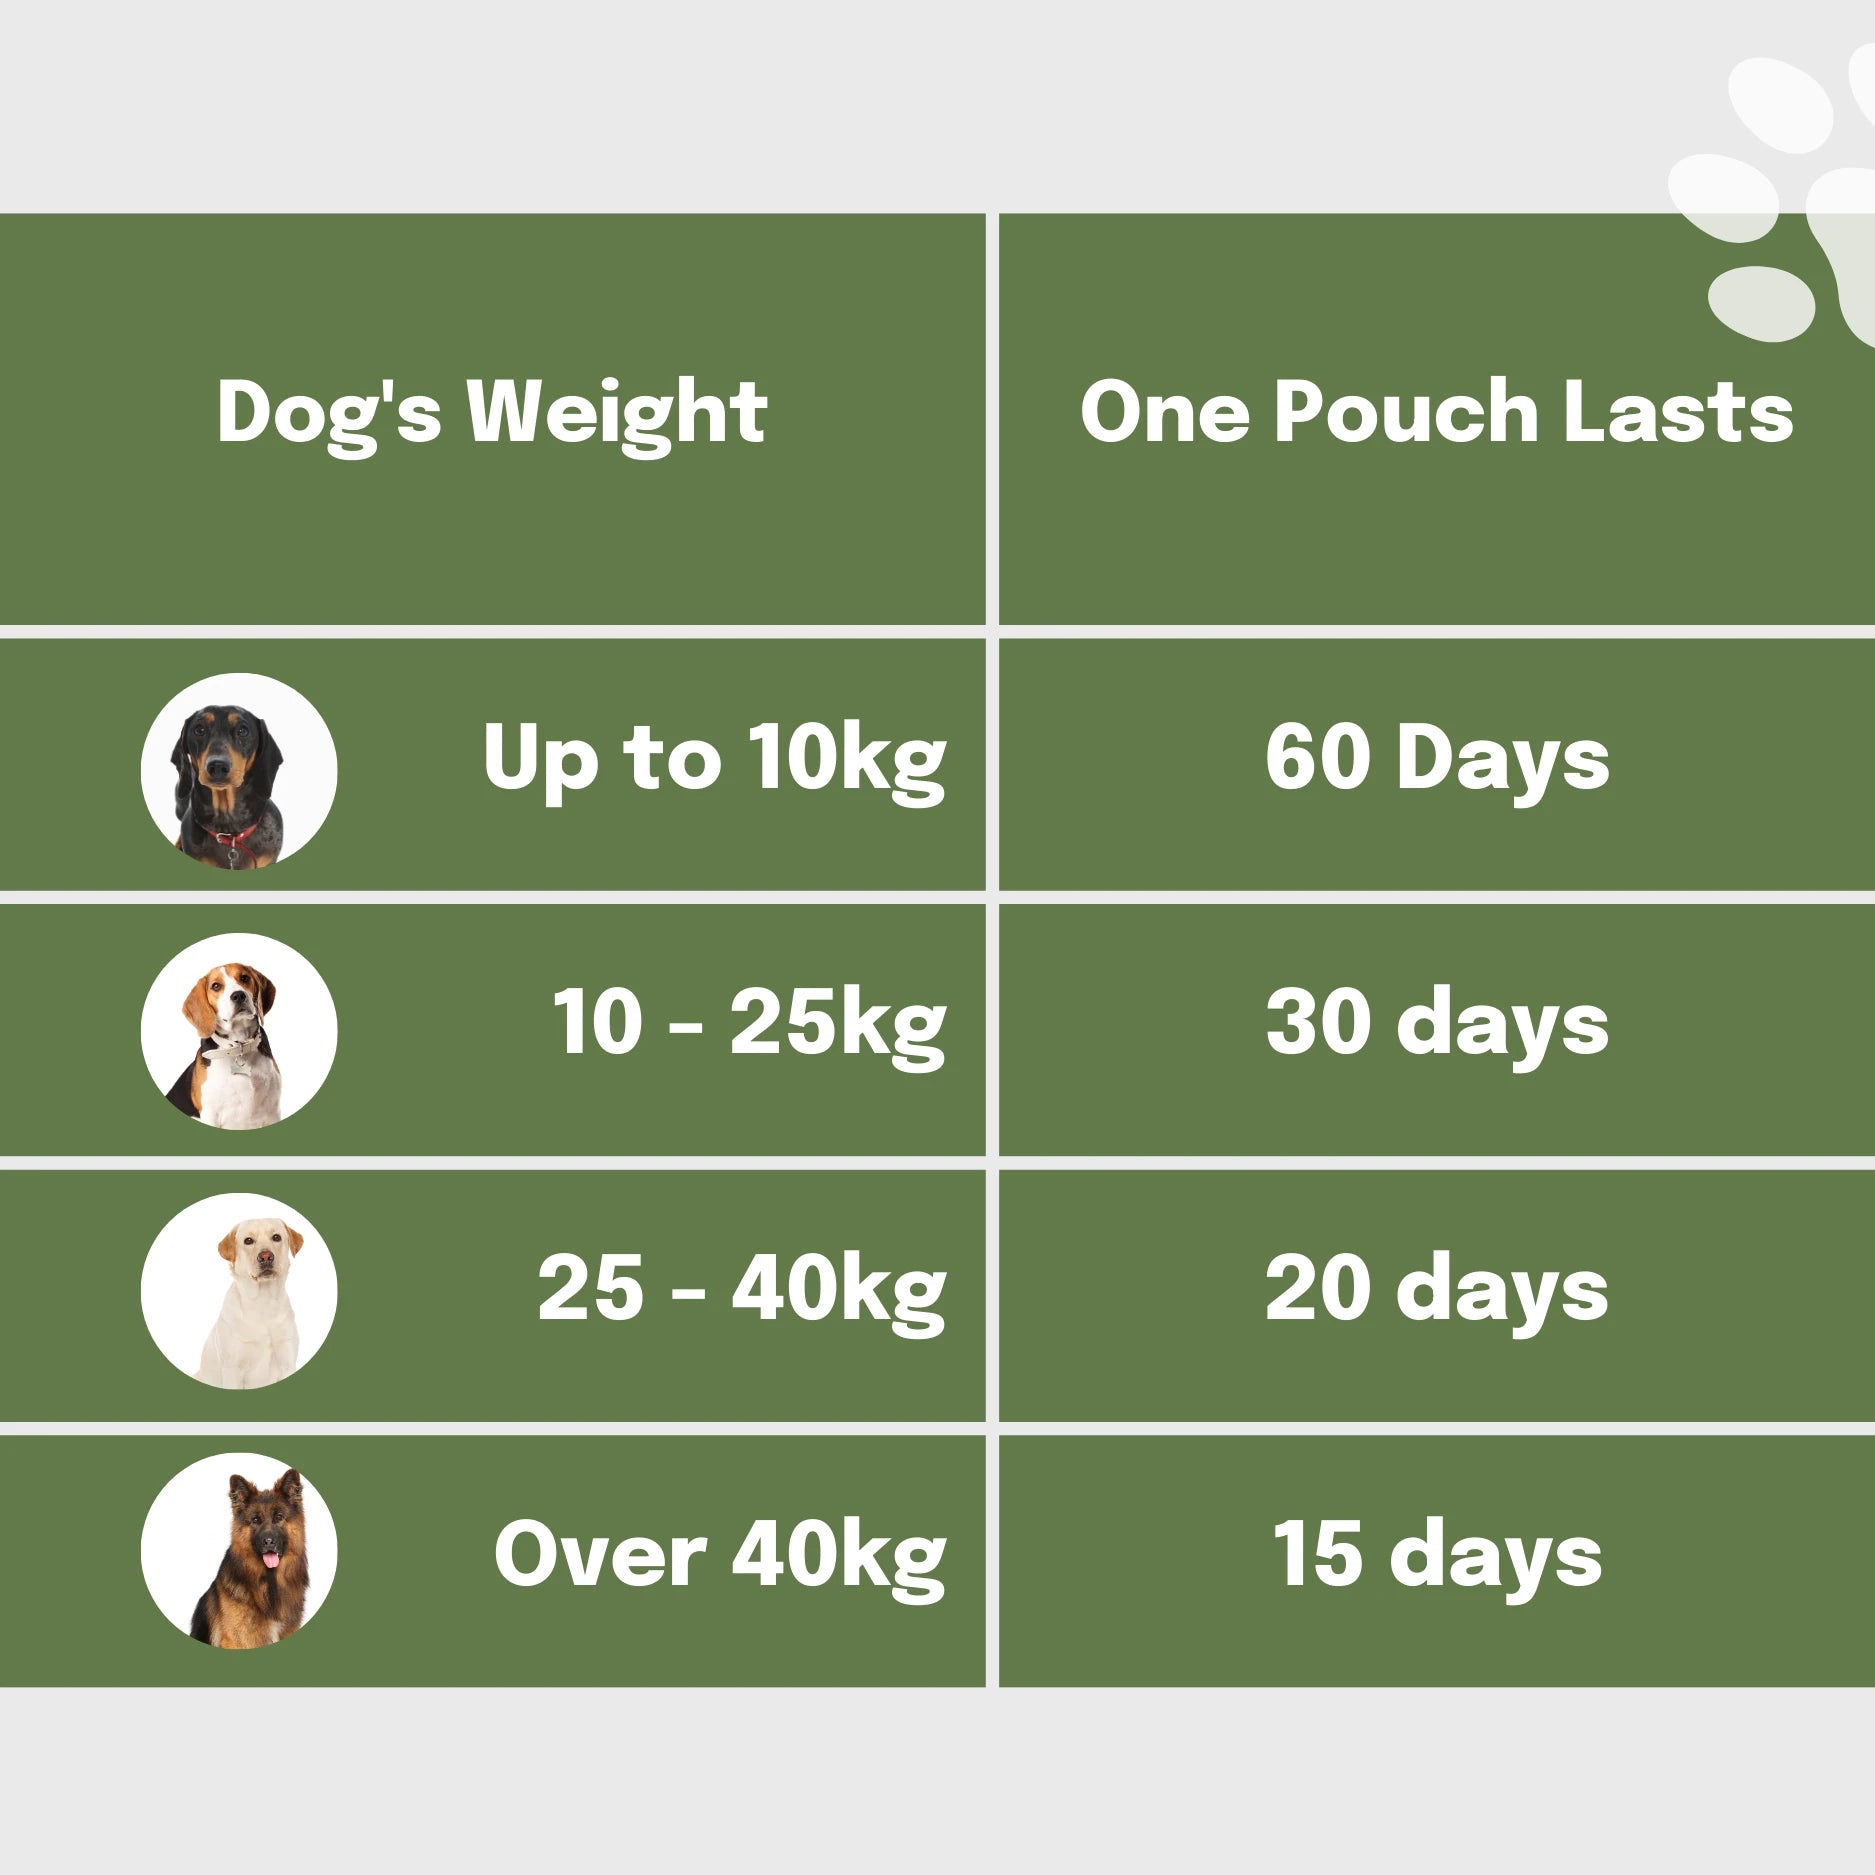 How long a pouch of Super Shrooms mushroom supplement will last your dog based on their size